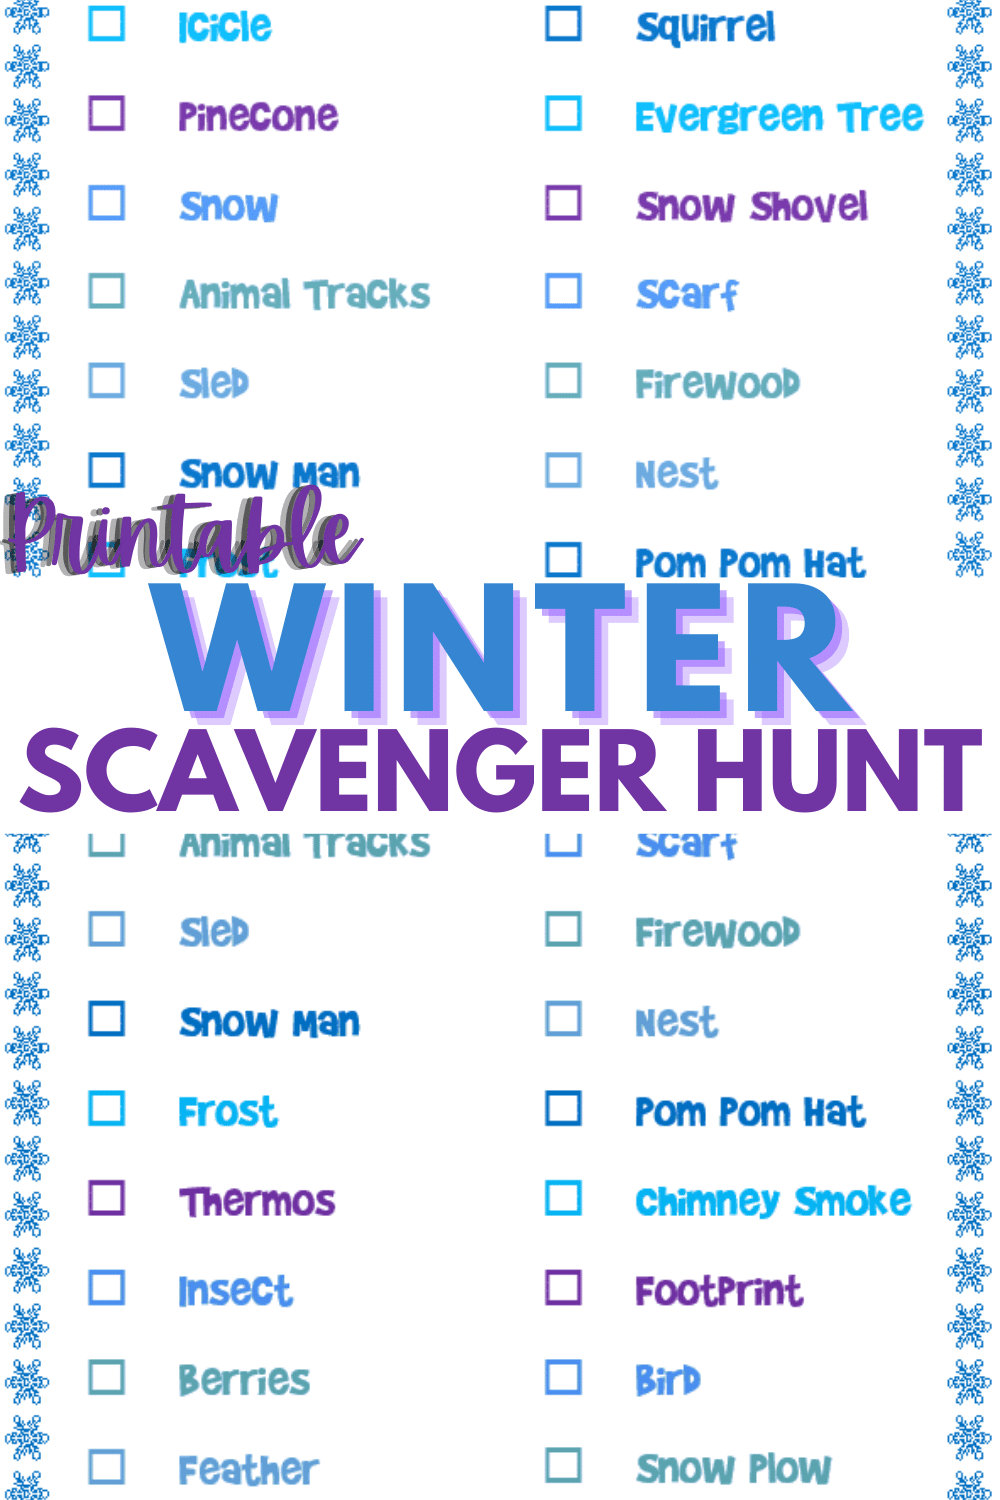 This printable winter scavenger hunt is a fun way to keep the kids occupied on a snow day or a fun family weekend activity. #printables #freeprintables #scavengerhunt #winter #familyprintables via @wondermomwannab